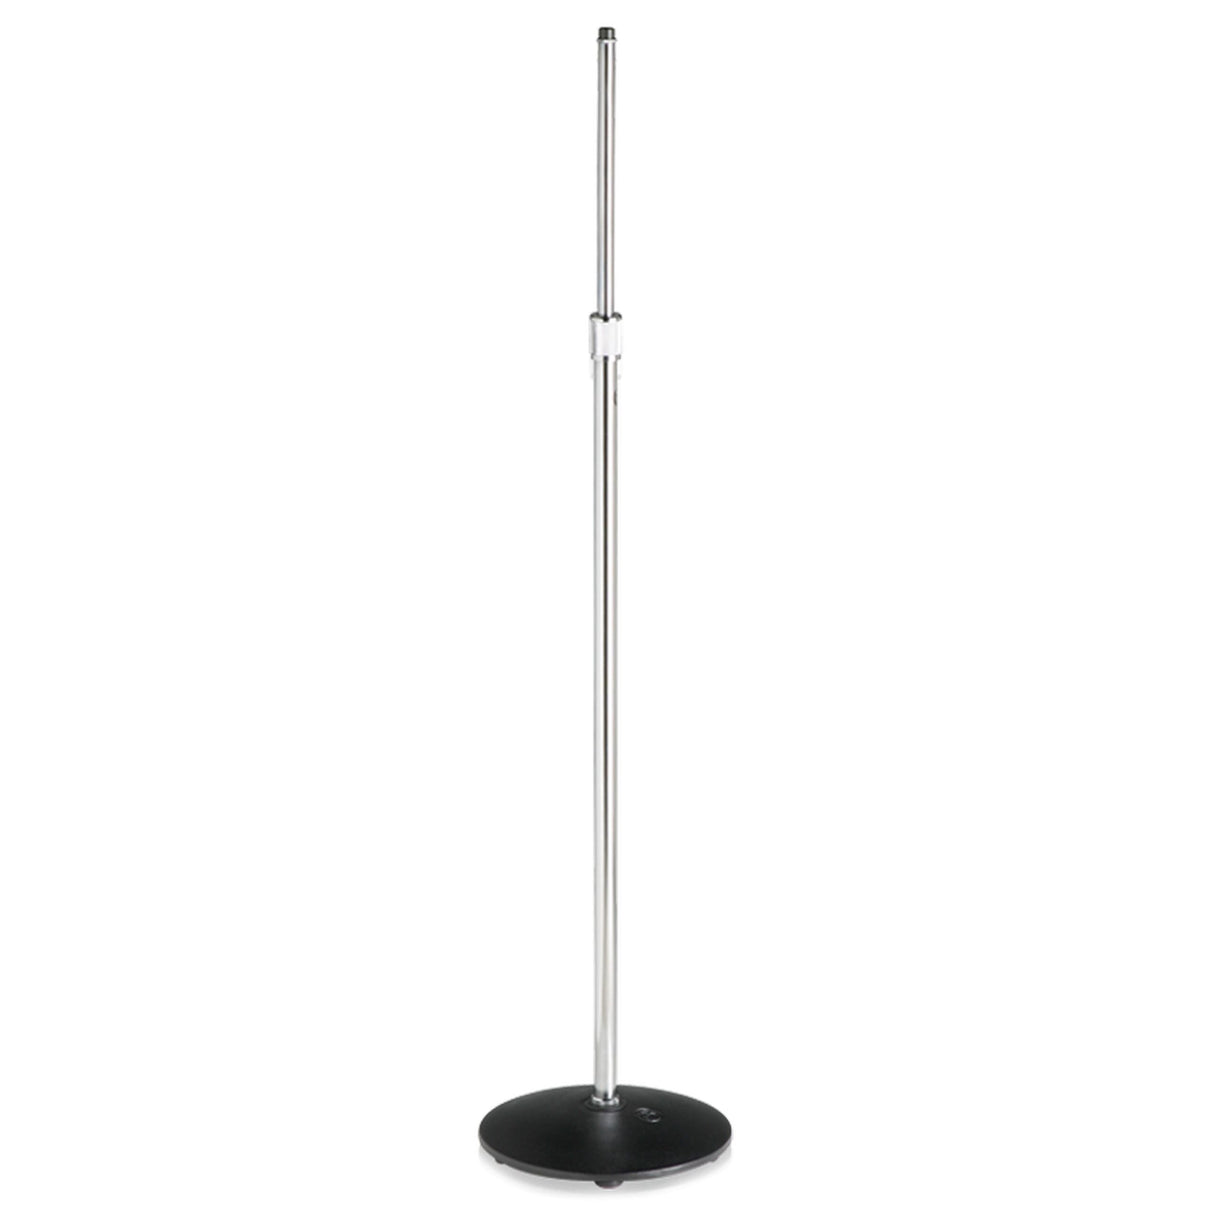 Atlas Sound MS-12C Low-Profile Microphone Stand, Chrome